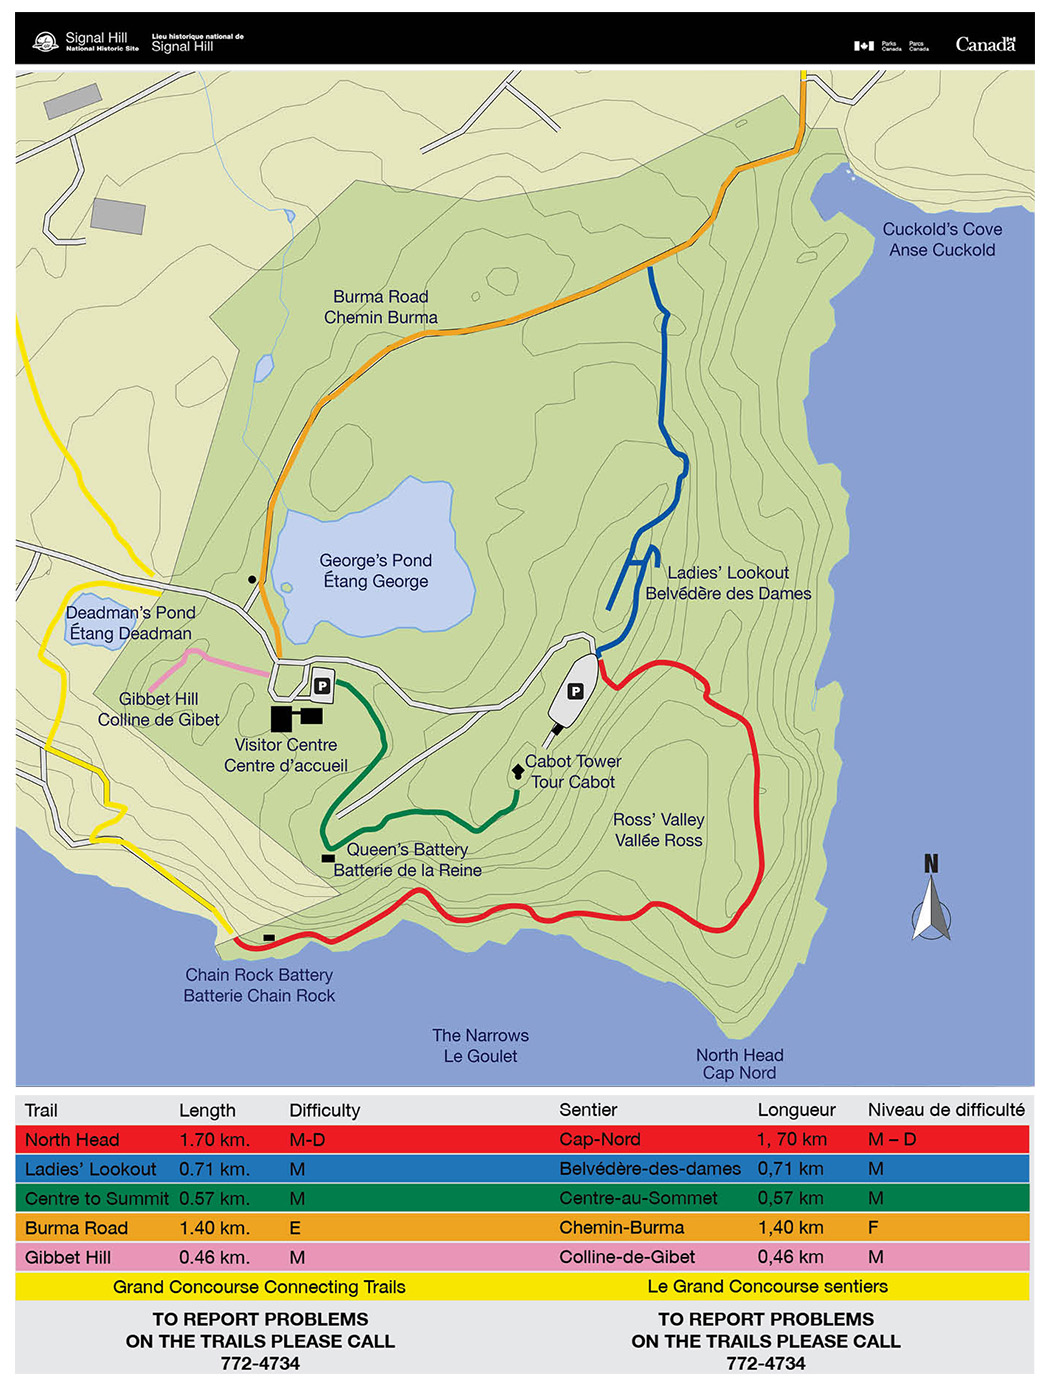 Map of Signal Hill trail system in English and French which shows five different routes.